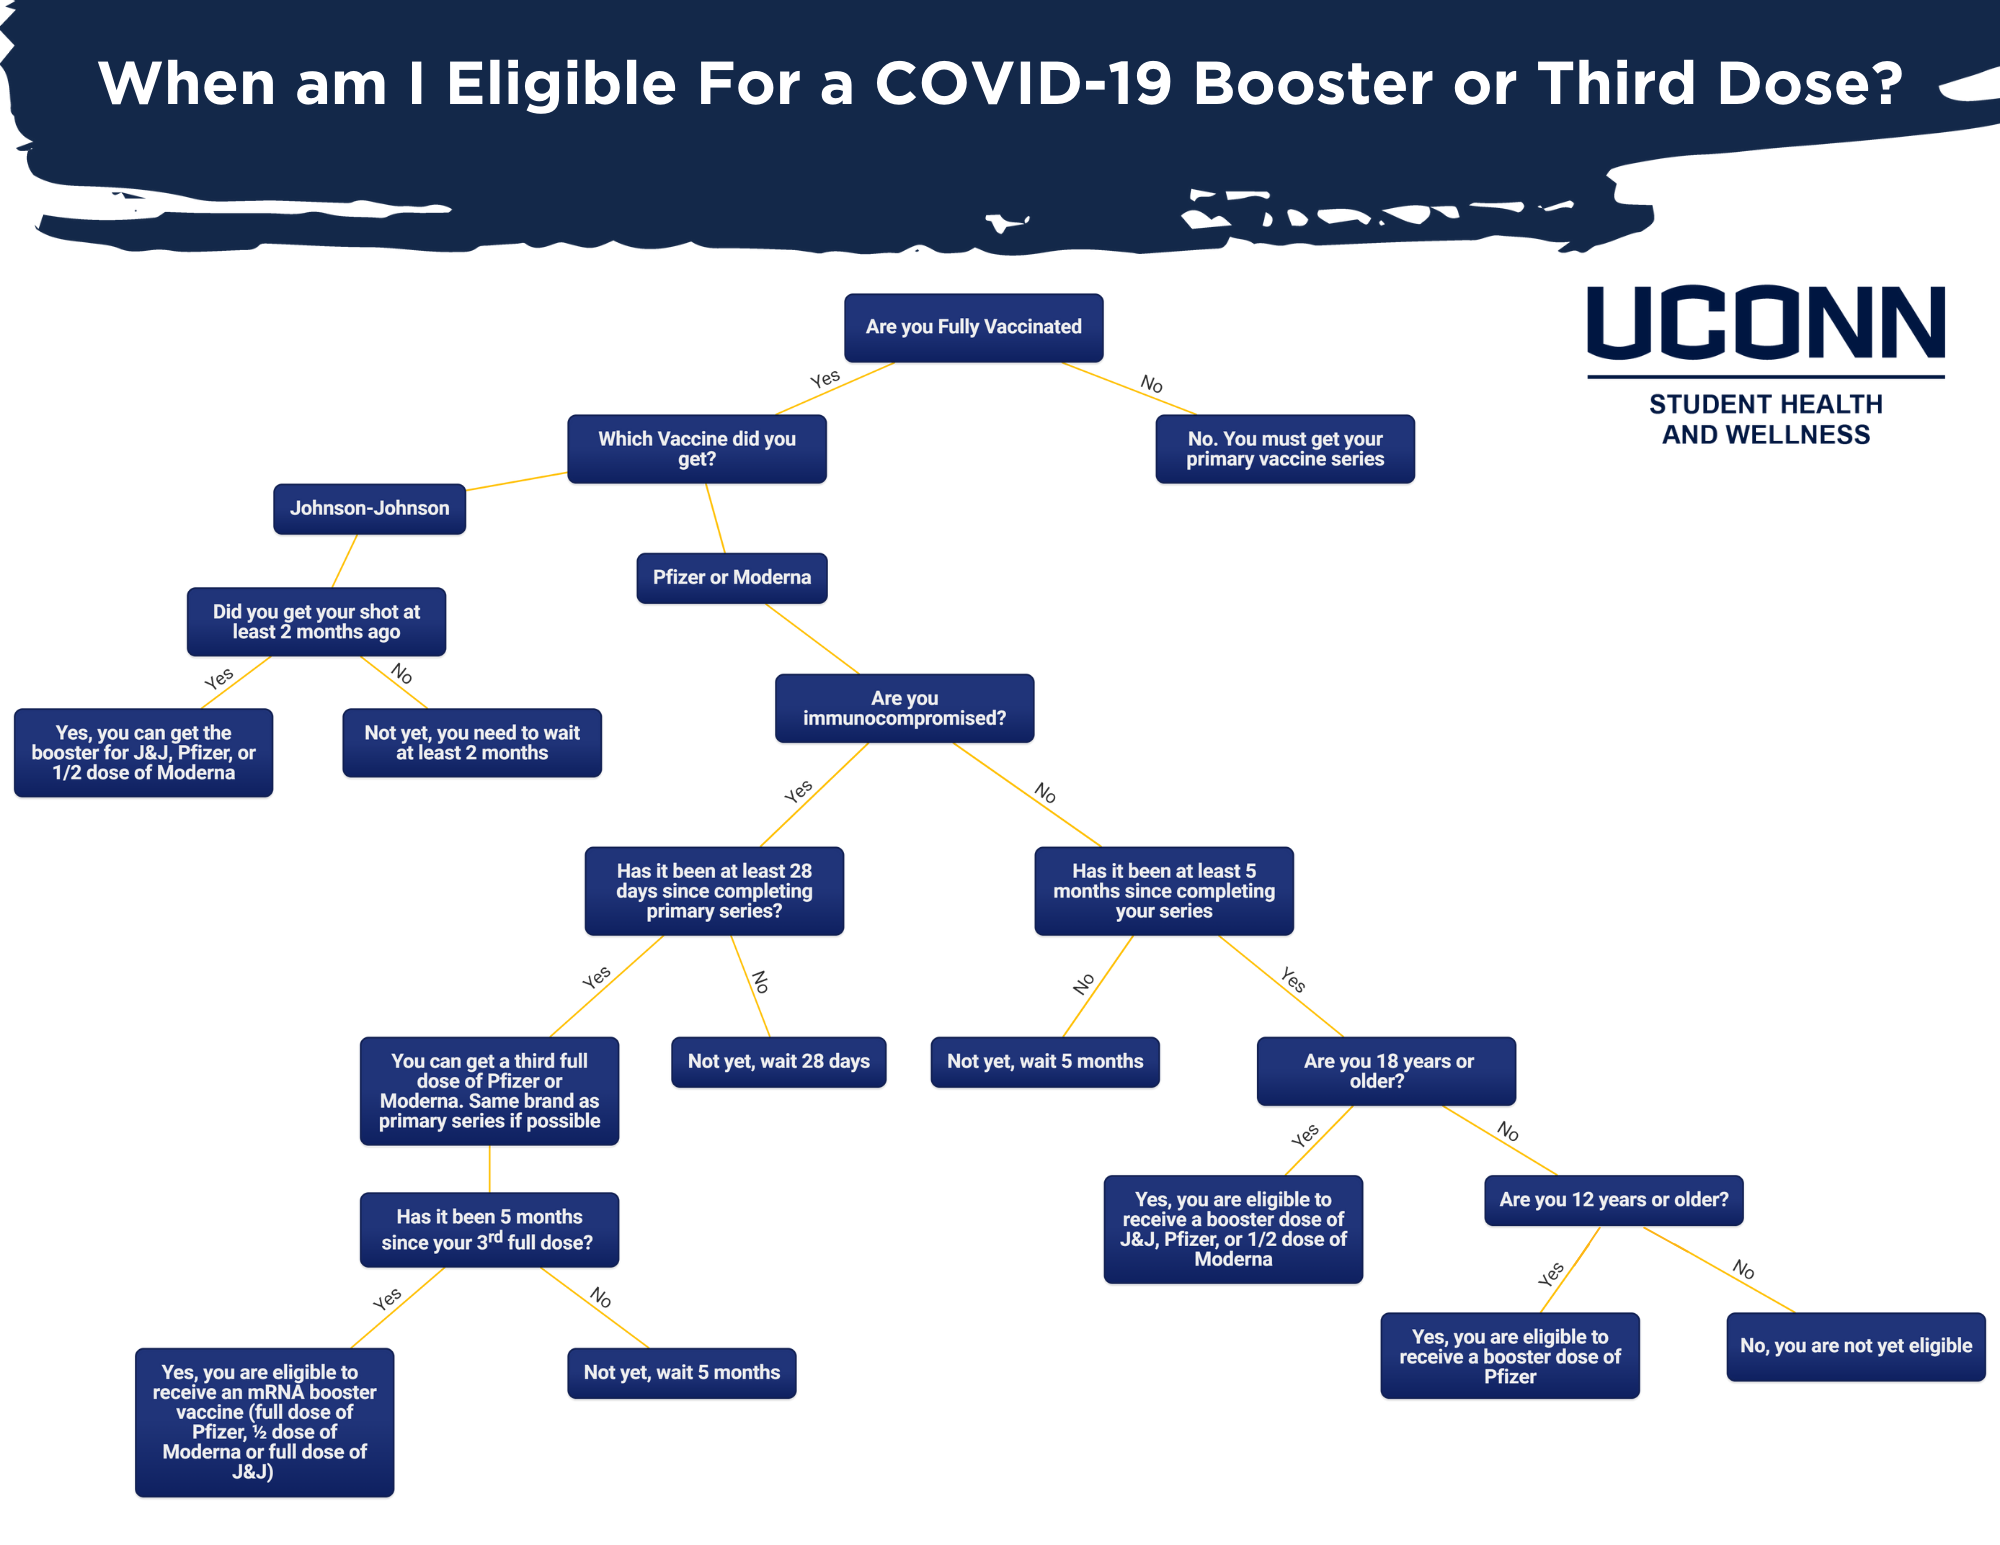 Eligible For Covid-19 Booster or Third Dose flowchart